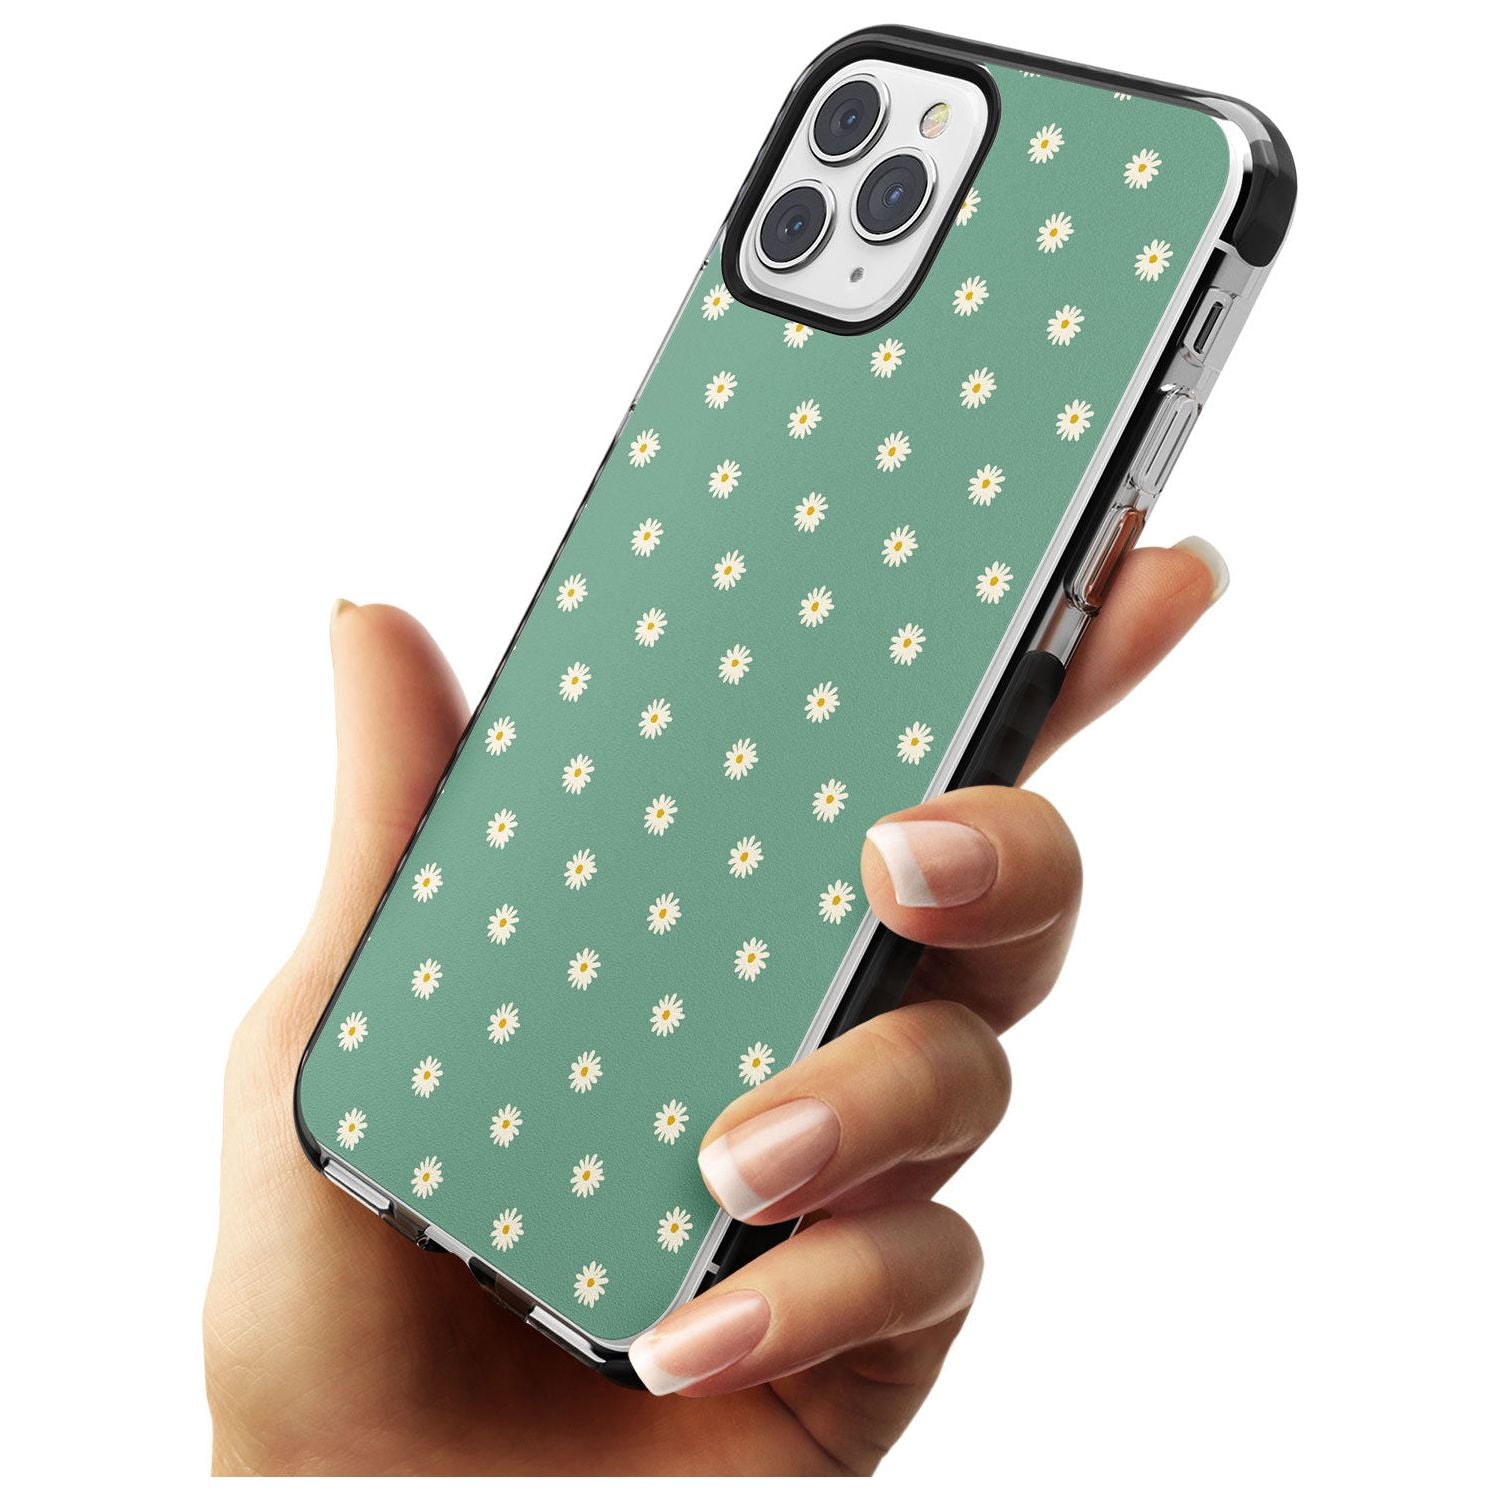 Daisy Pattern - Teal Cute Floral Daisy Design Pink Fade Impact Phone Case for iPhone 11